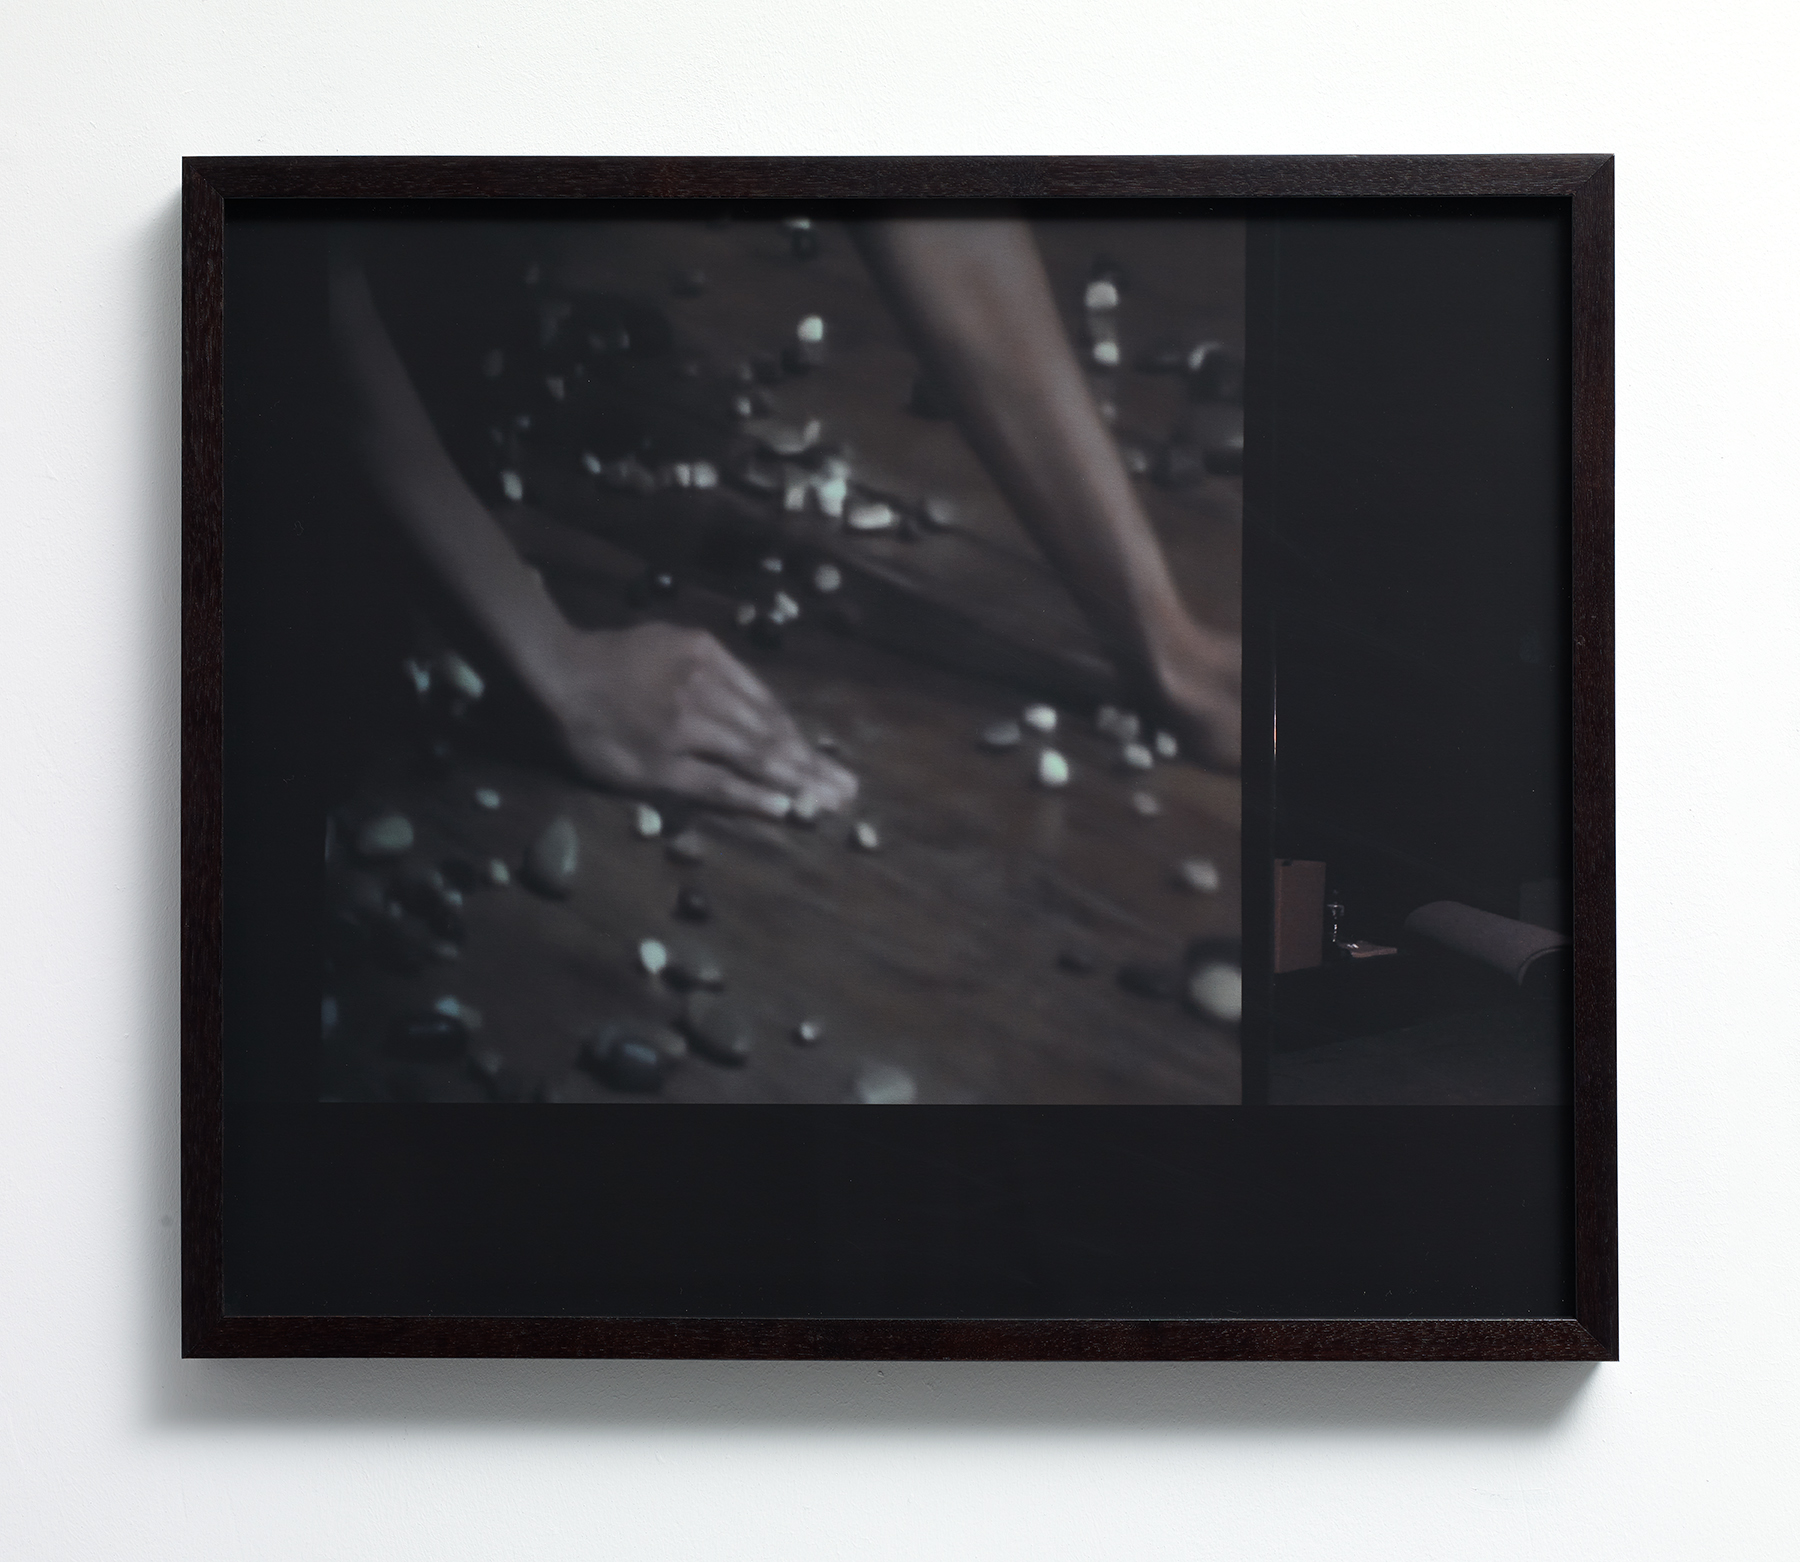 Image of Carrie Mae Weems' work The Destroyed Mendieta, Hands, 2012